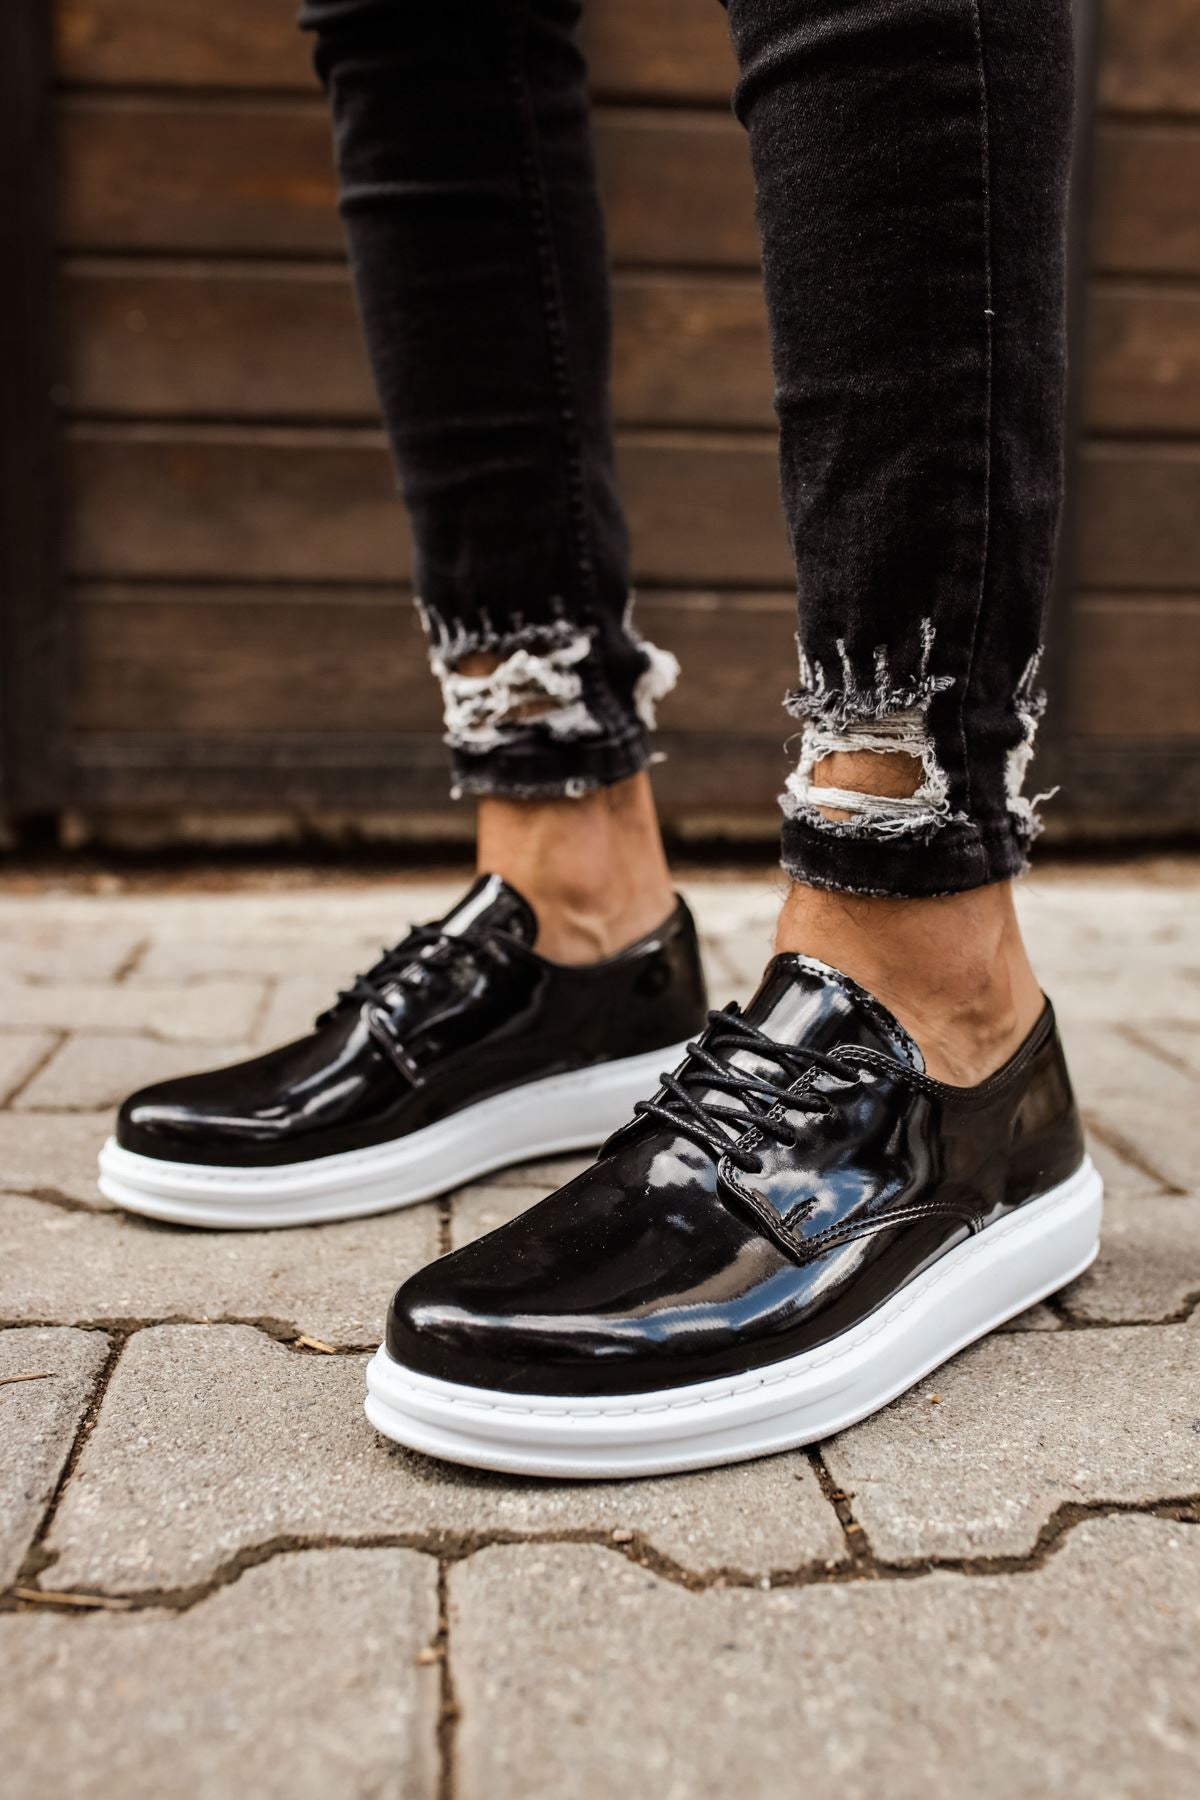 CH003 Men's Black-White Sole Patent Leather Casual Classic Shoes - STREETMODE ™